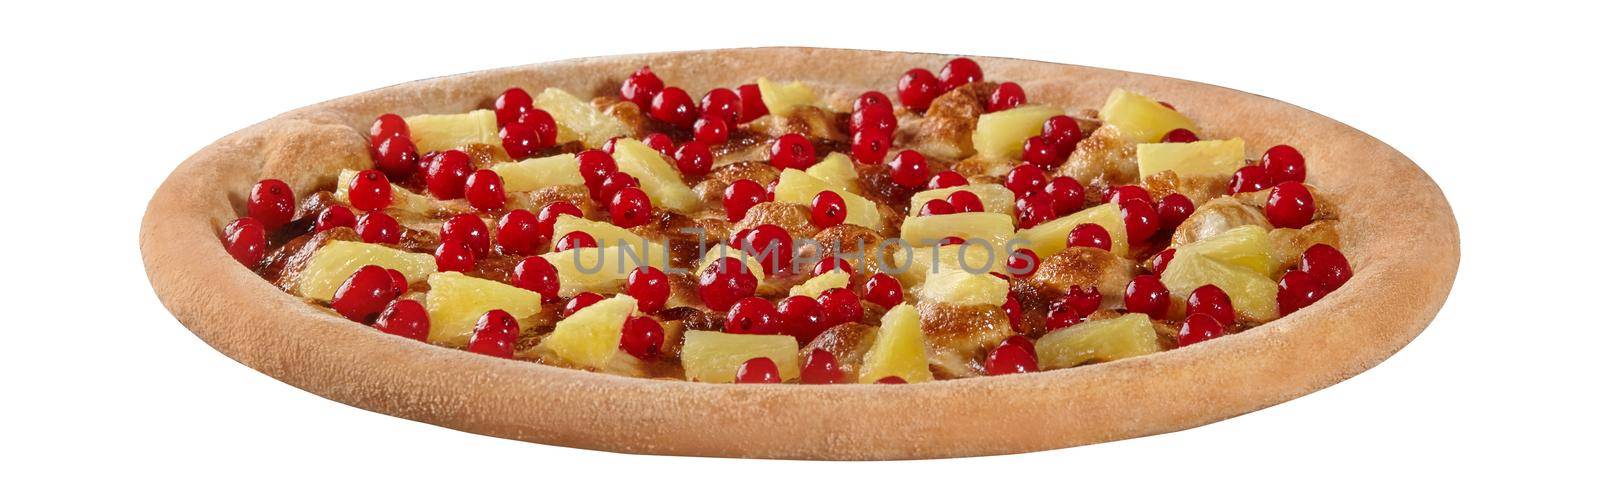 Closeup of pizza-shaped open pie with ripe red currants and chopped pineapple on layer of browned melted mozzarella with condensed milk isolated on white background. Italian style sweet snacks